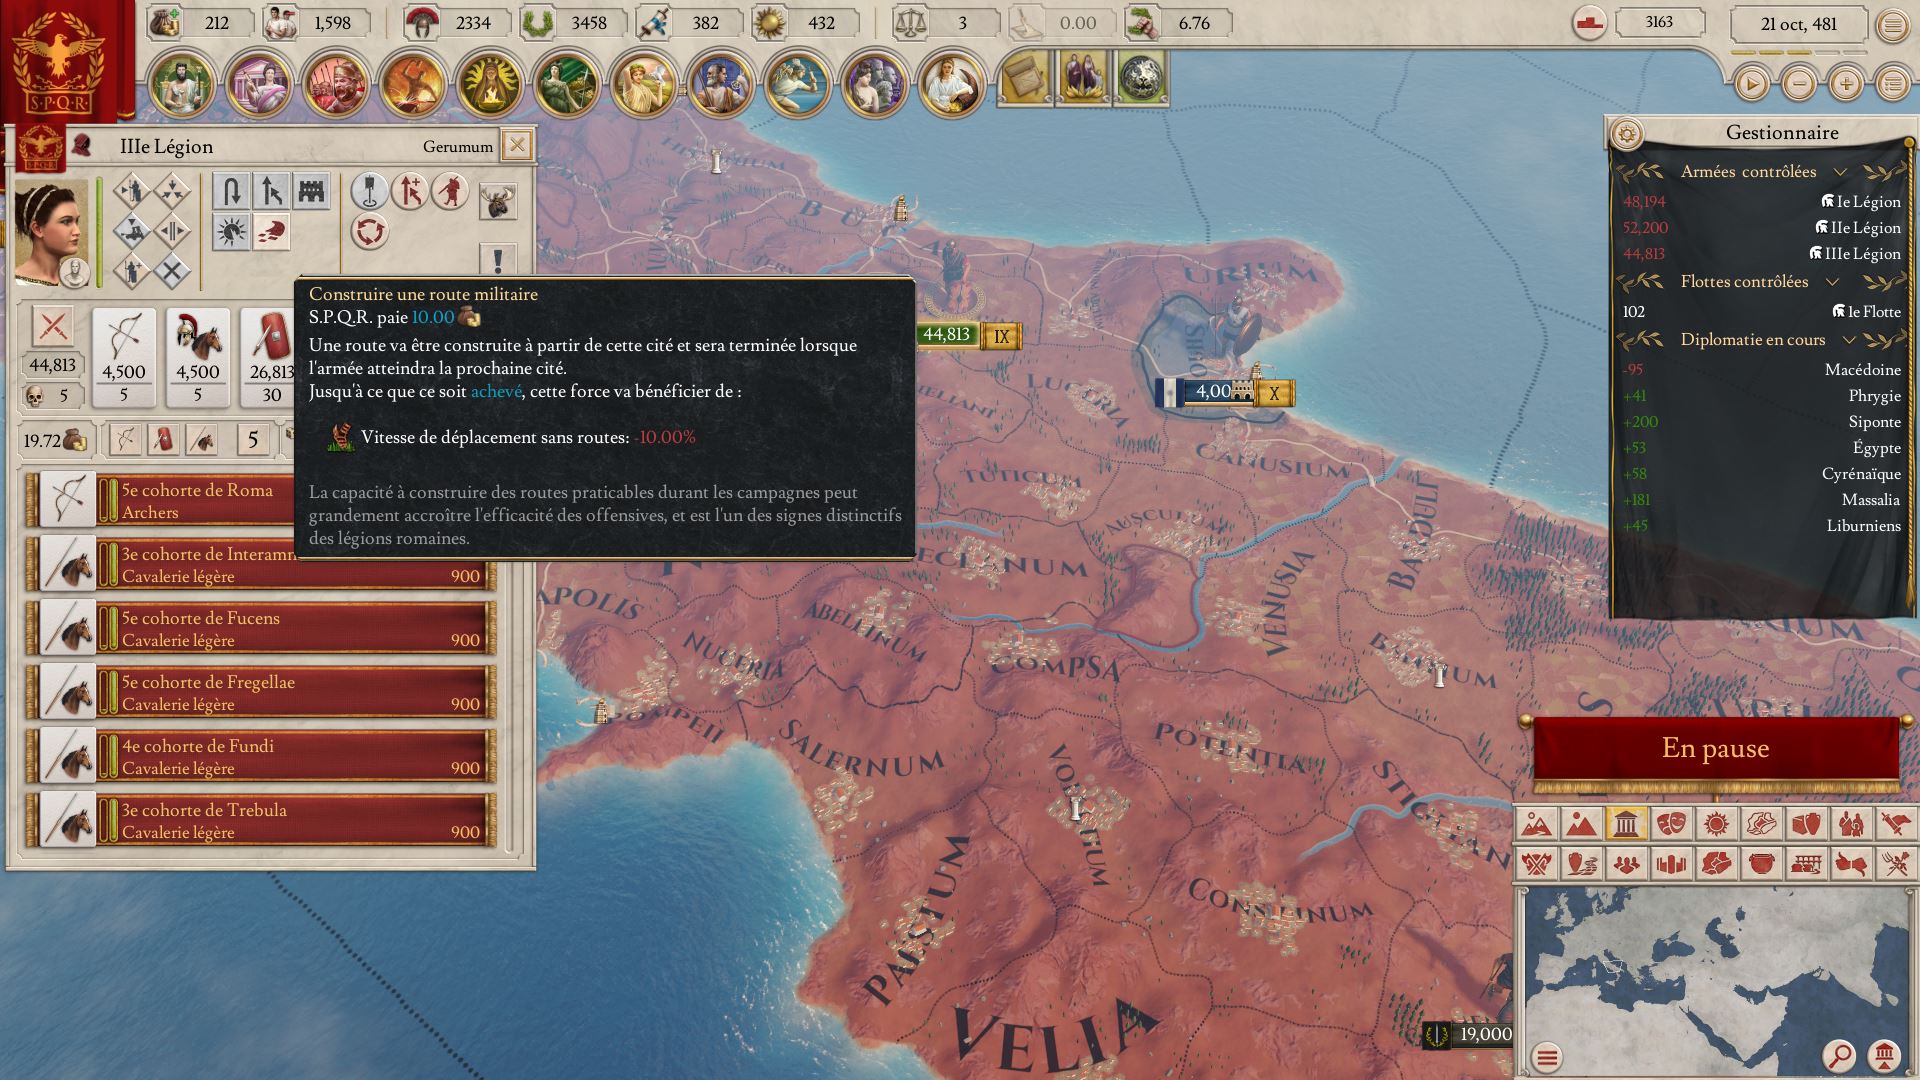 Imperator Rome : Road price in gold + build it faster + move faster 1